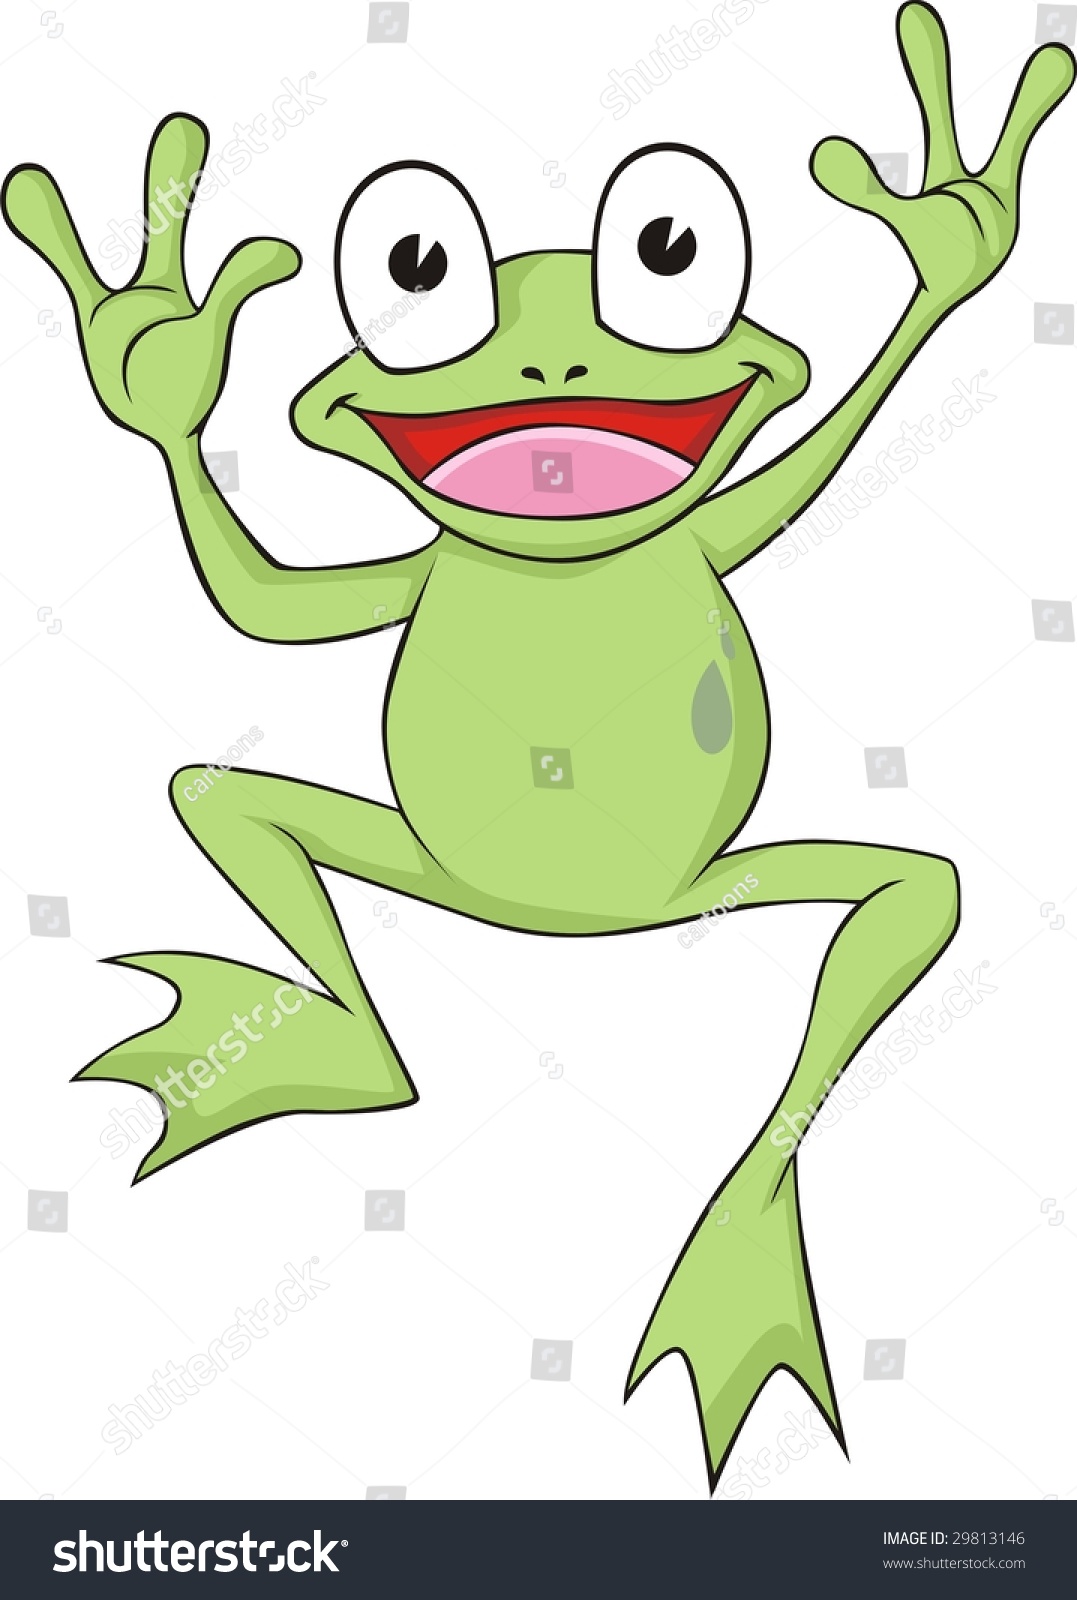 jumping frog clipart - photo #39